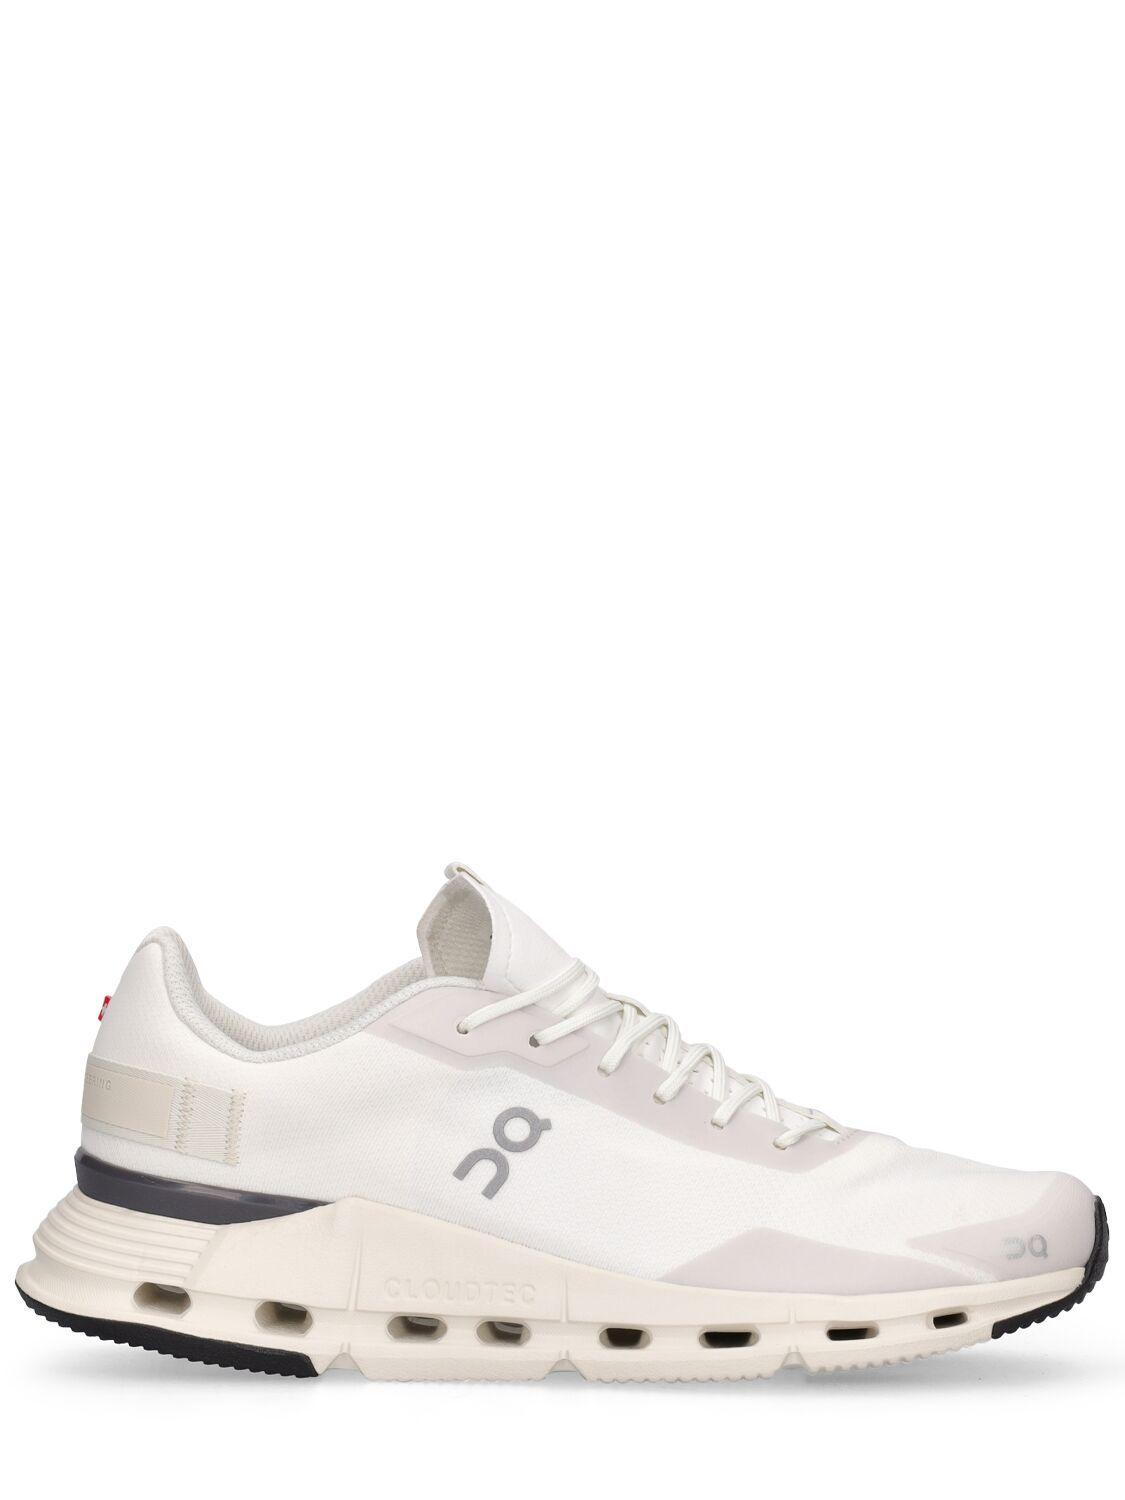 on-cloudnova-form-sneakers-in-white-lyst